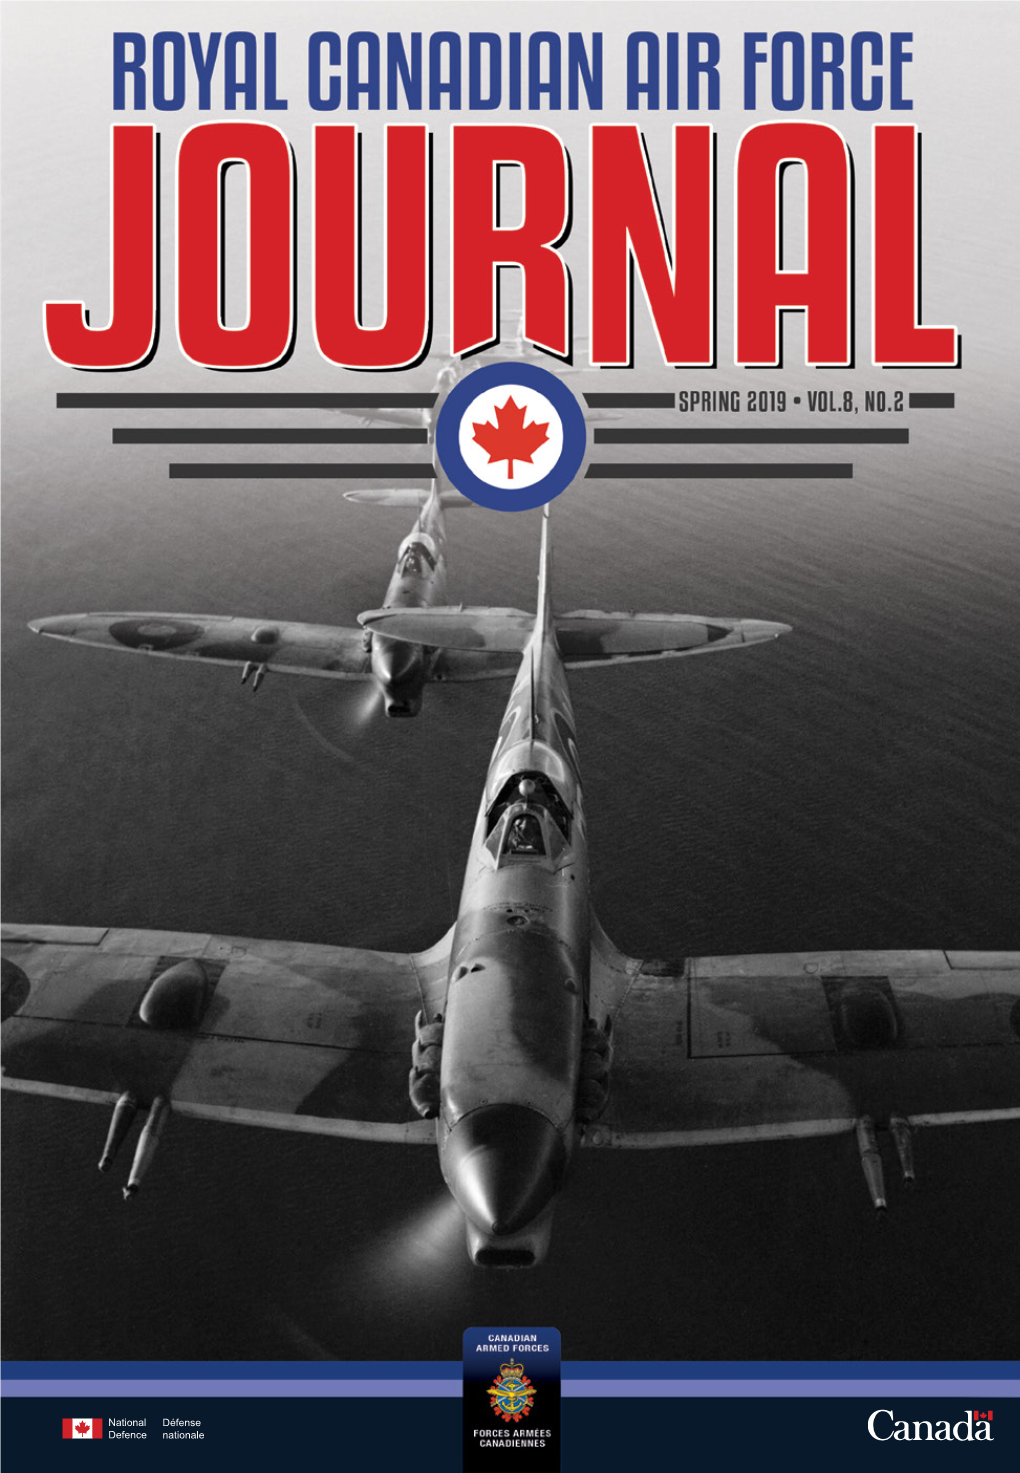 The Royal Canadian Air Force Journal, Vol. 8, No. 2, Spring 2019